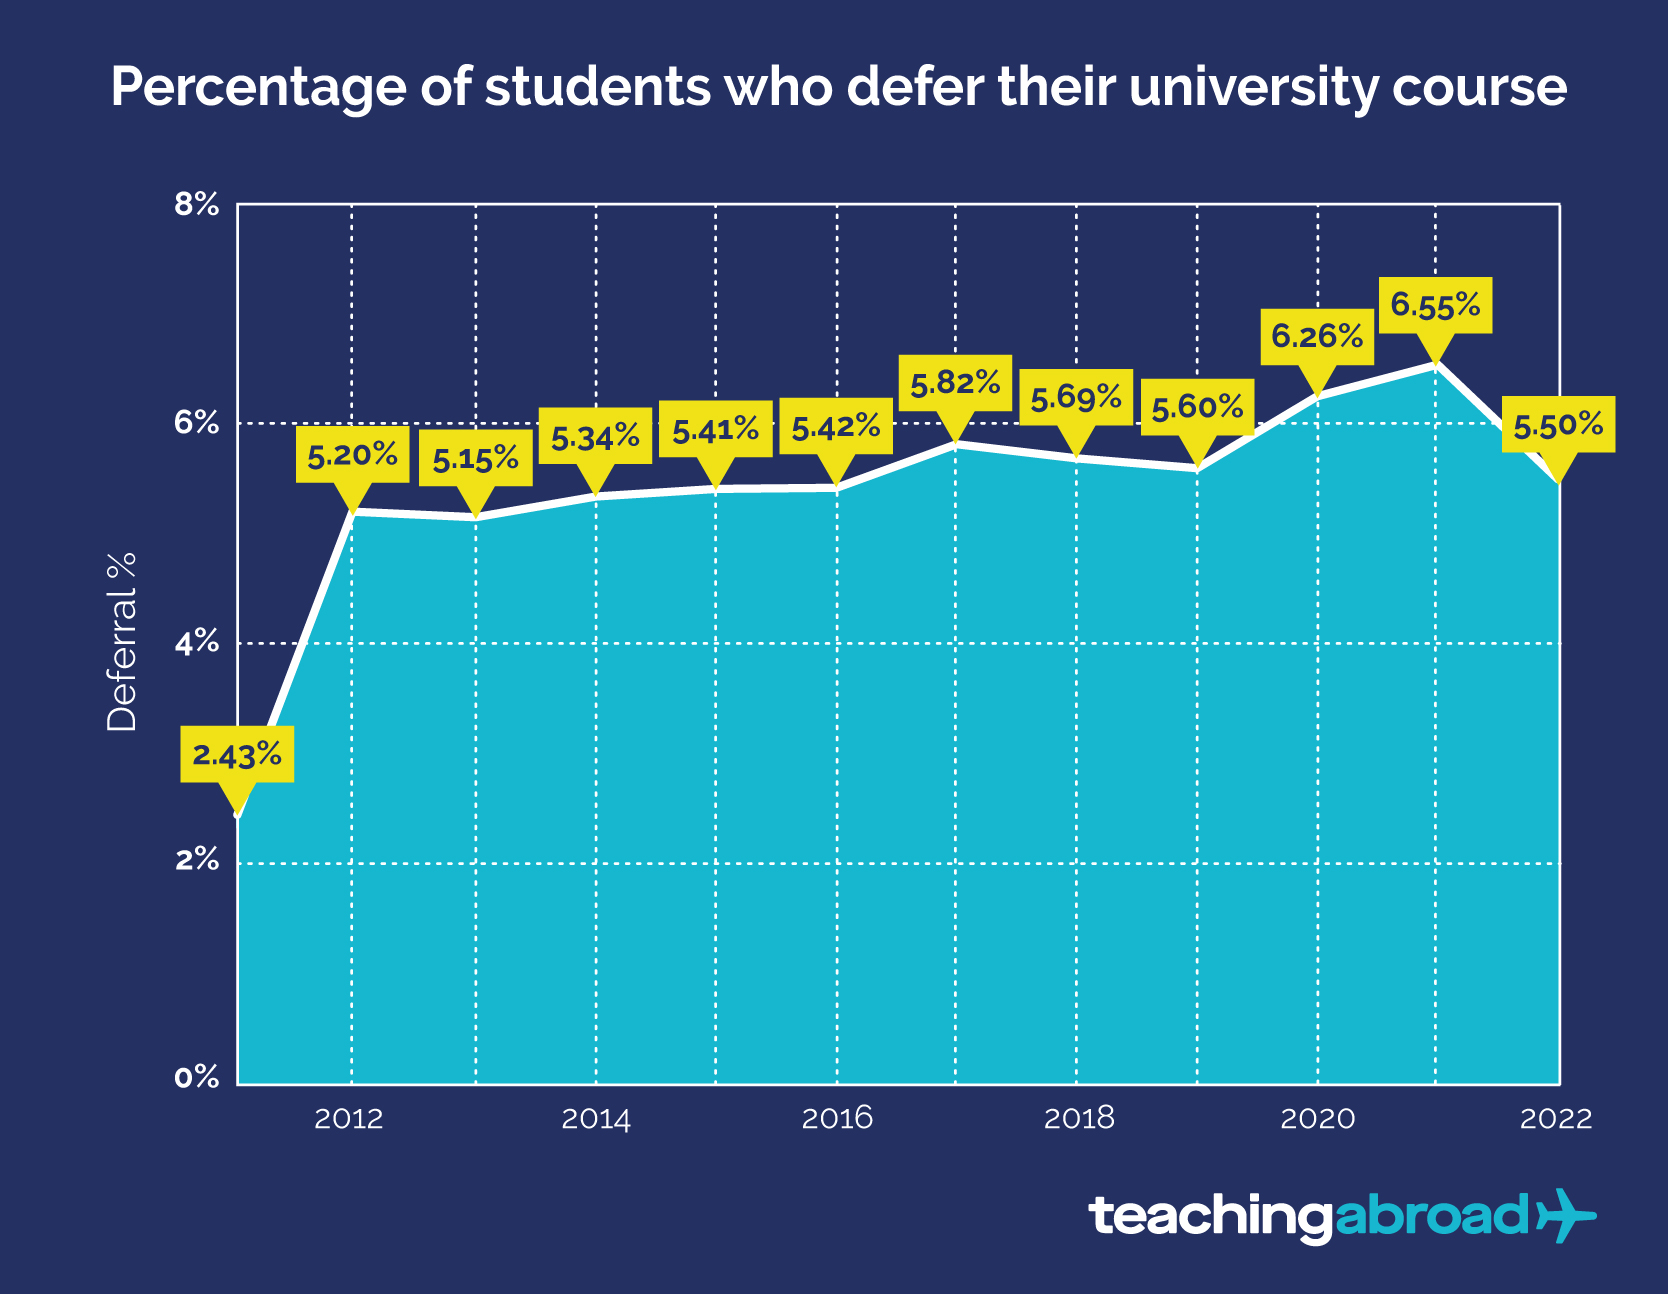 Percentage of students who defer their university course by year